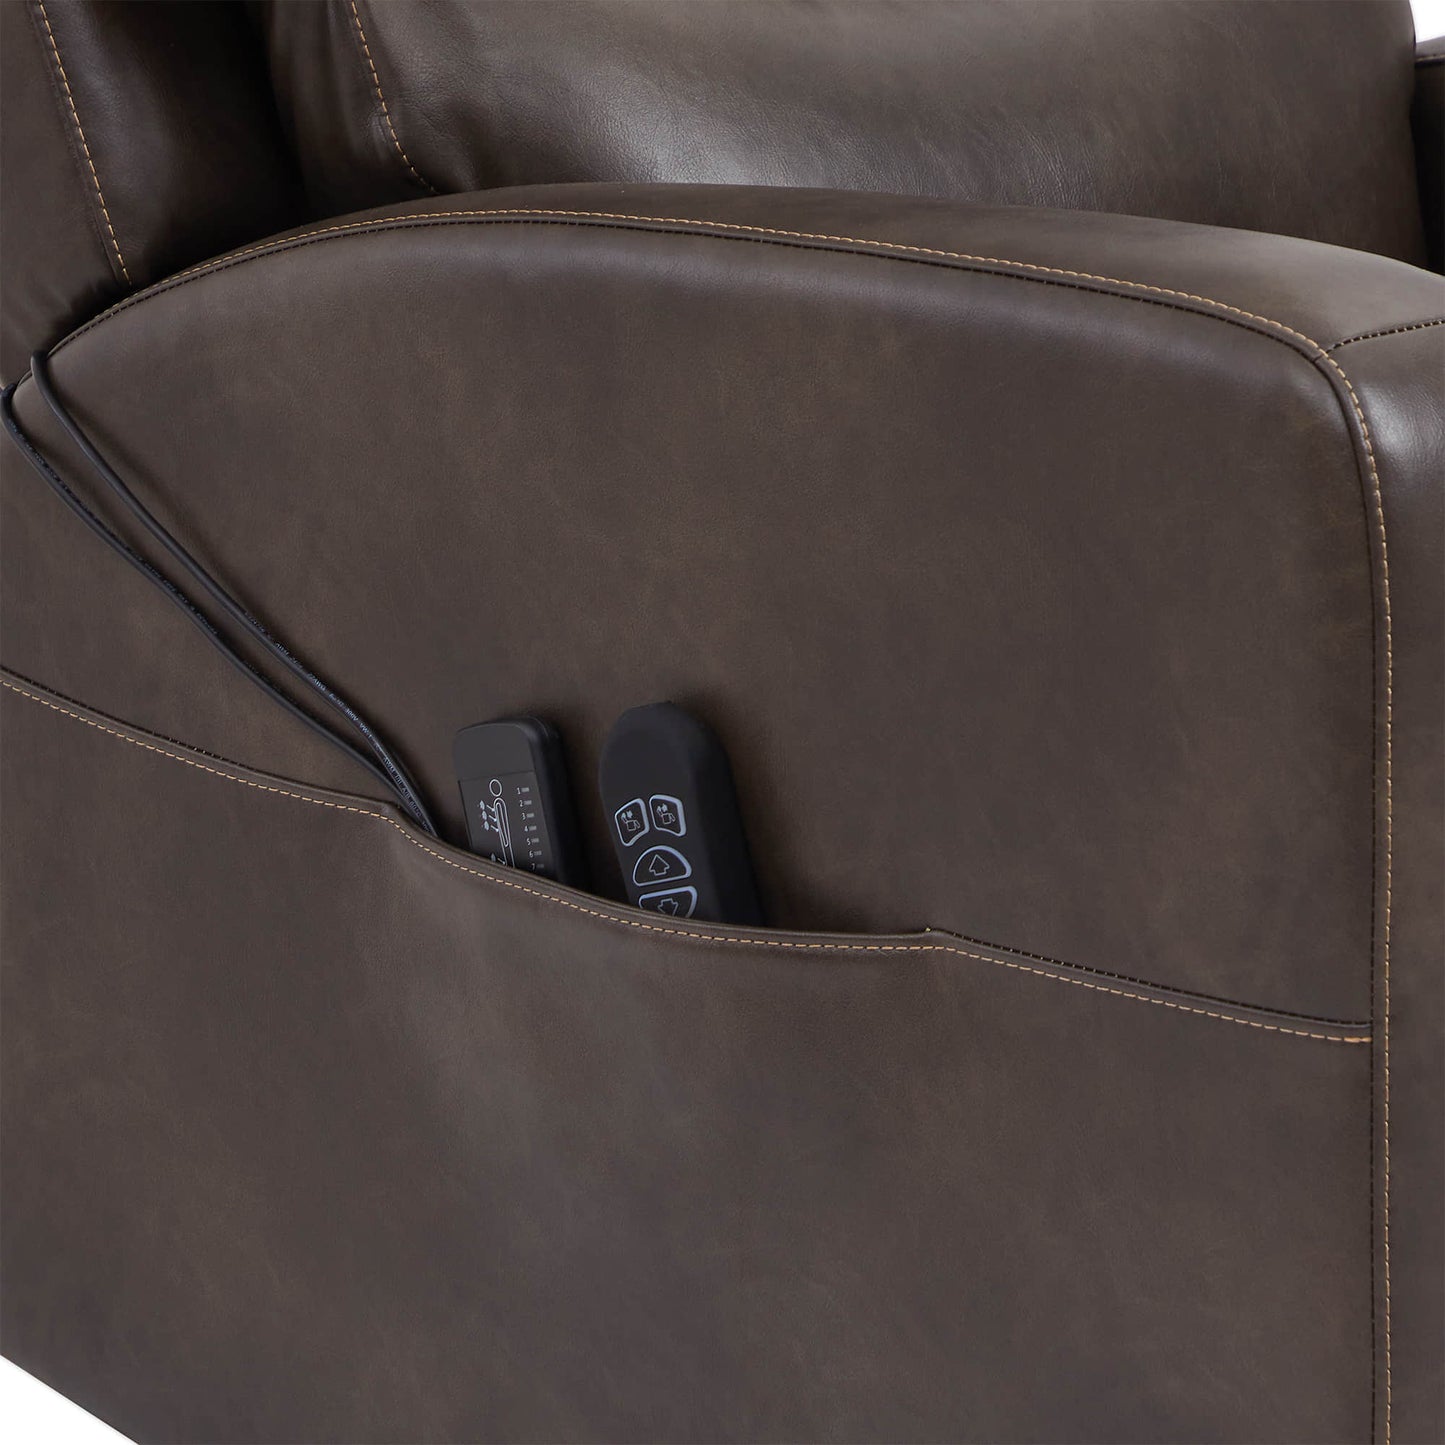 CHITA LIVING-Finley Power Lift Chair Recliner For Elderly-Lift Chair-Faux Leather-Chocolate-